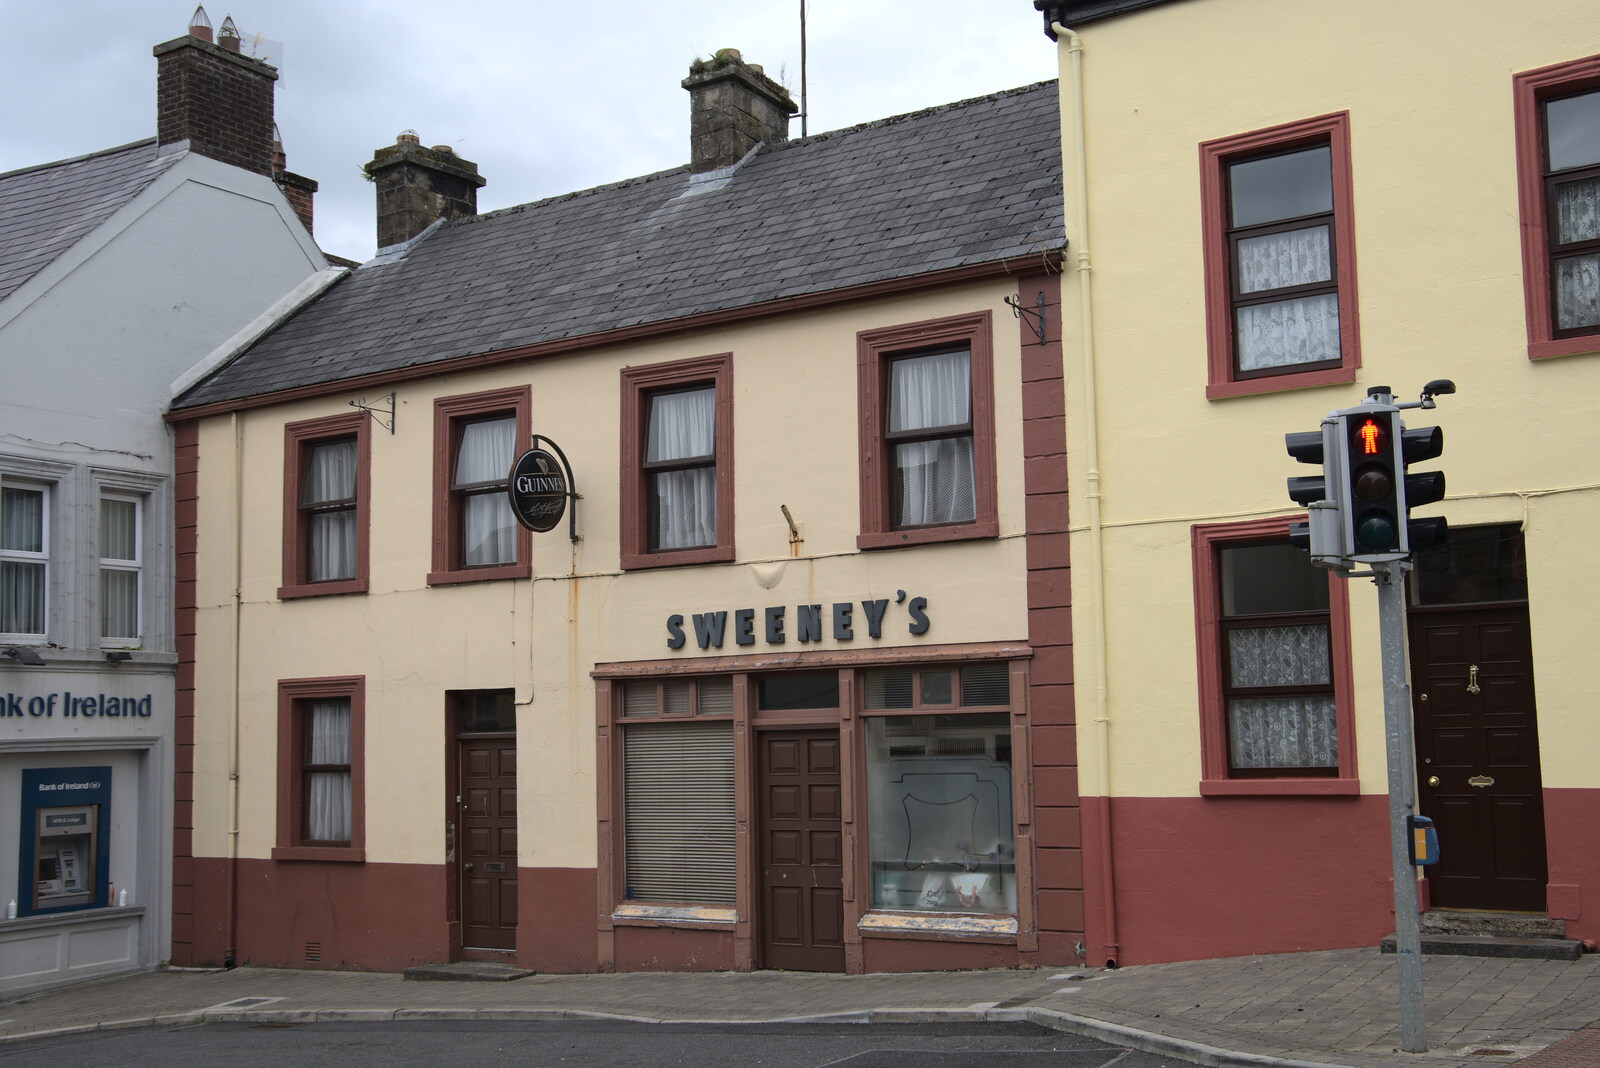 A Trip to Manorhamilton, County Leitrim, Ireland - 11th August 2021: Outside at Sweeney's